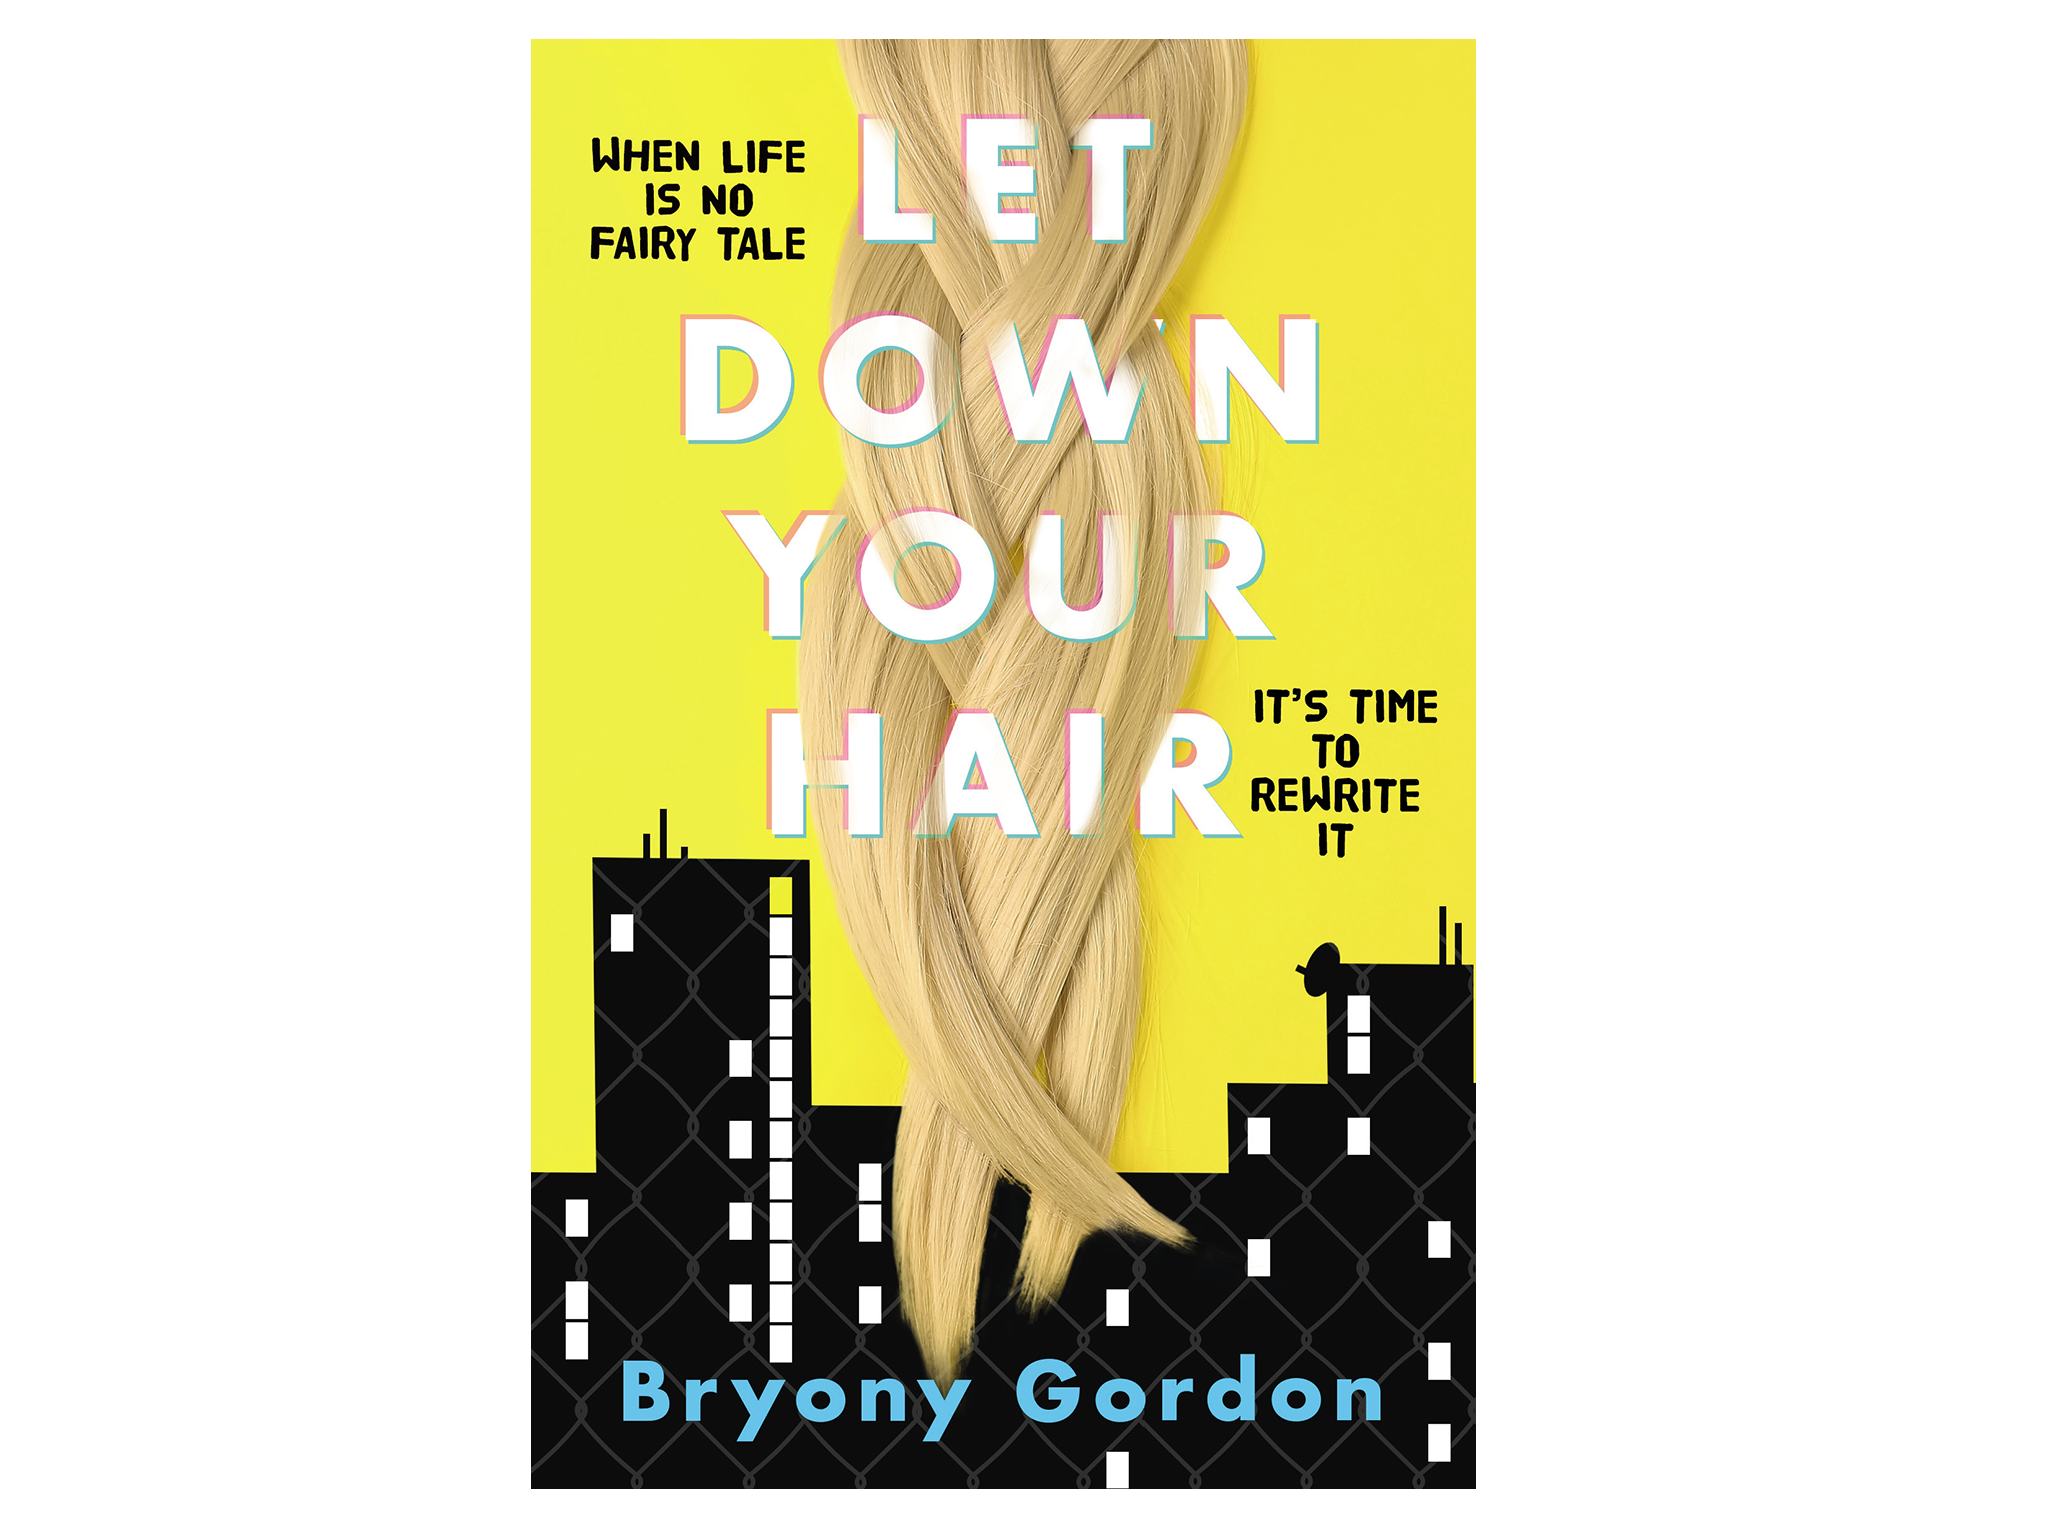 Let down your hair by Bryony Gordon